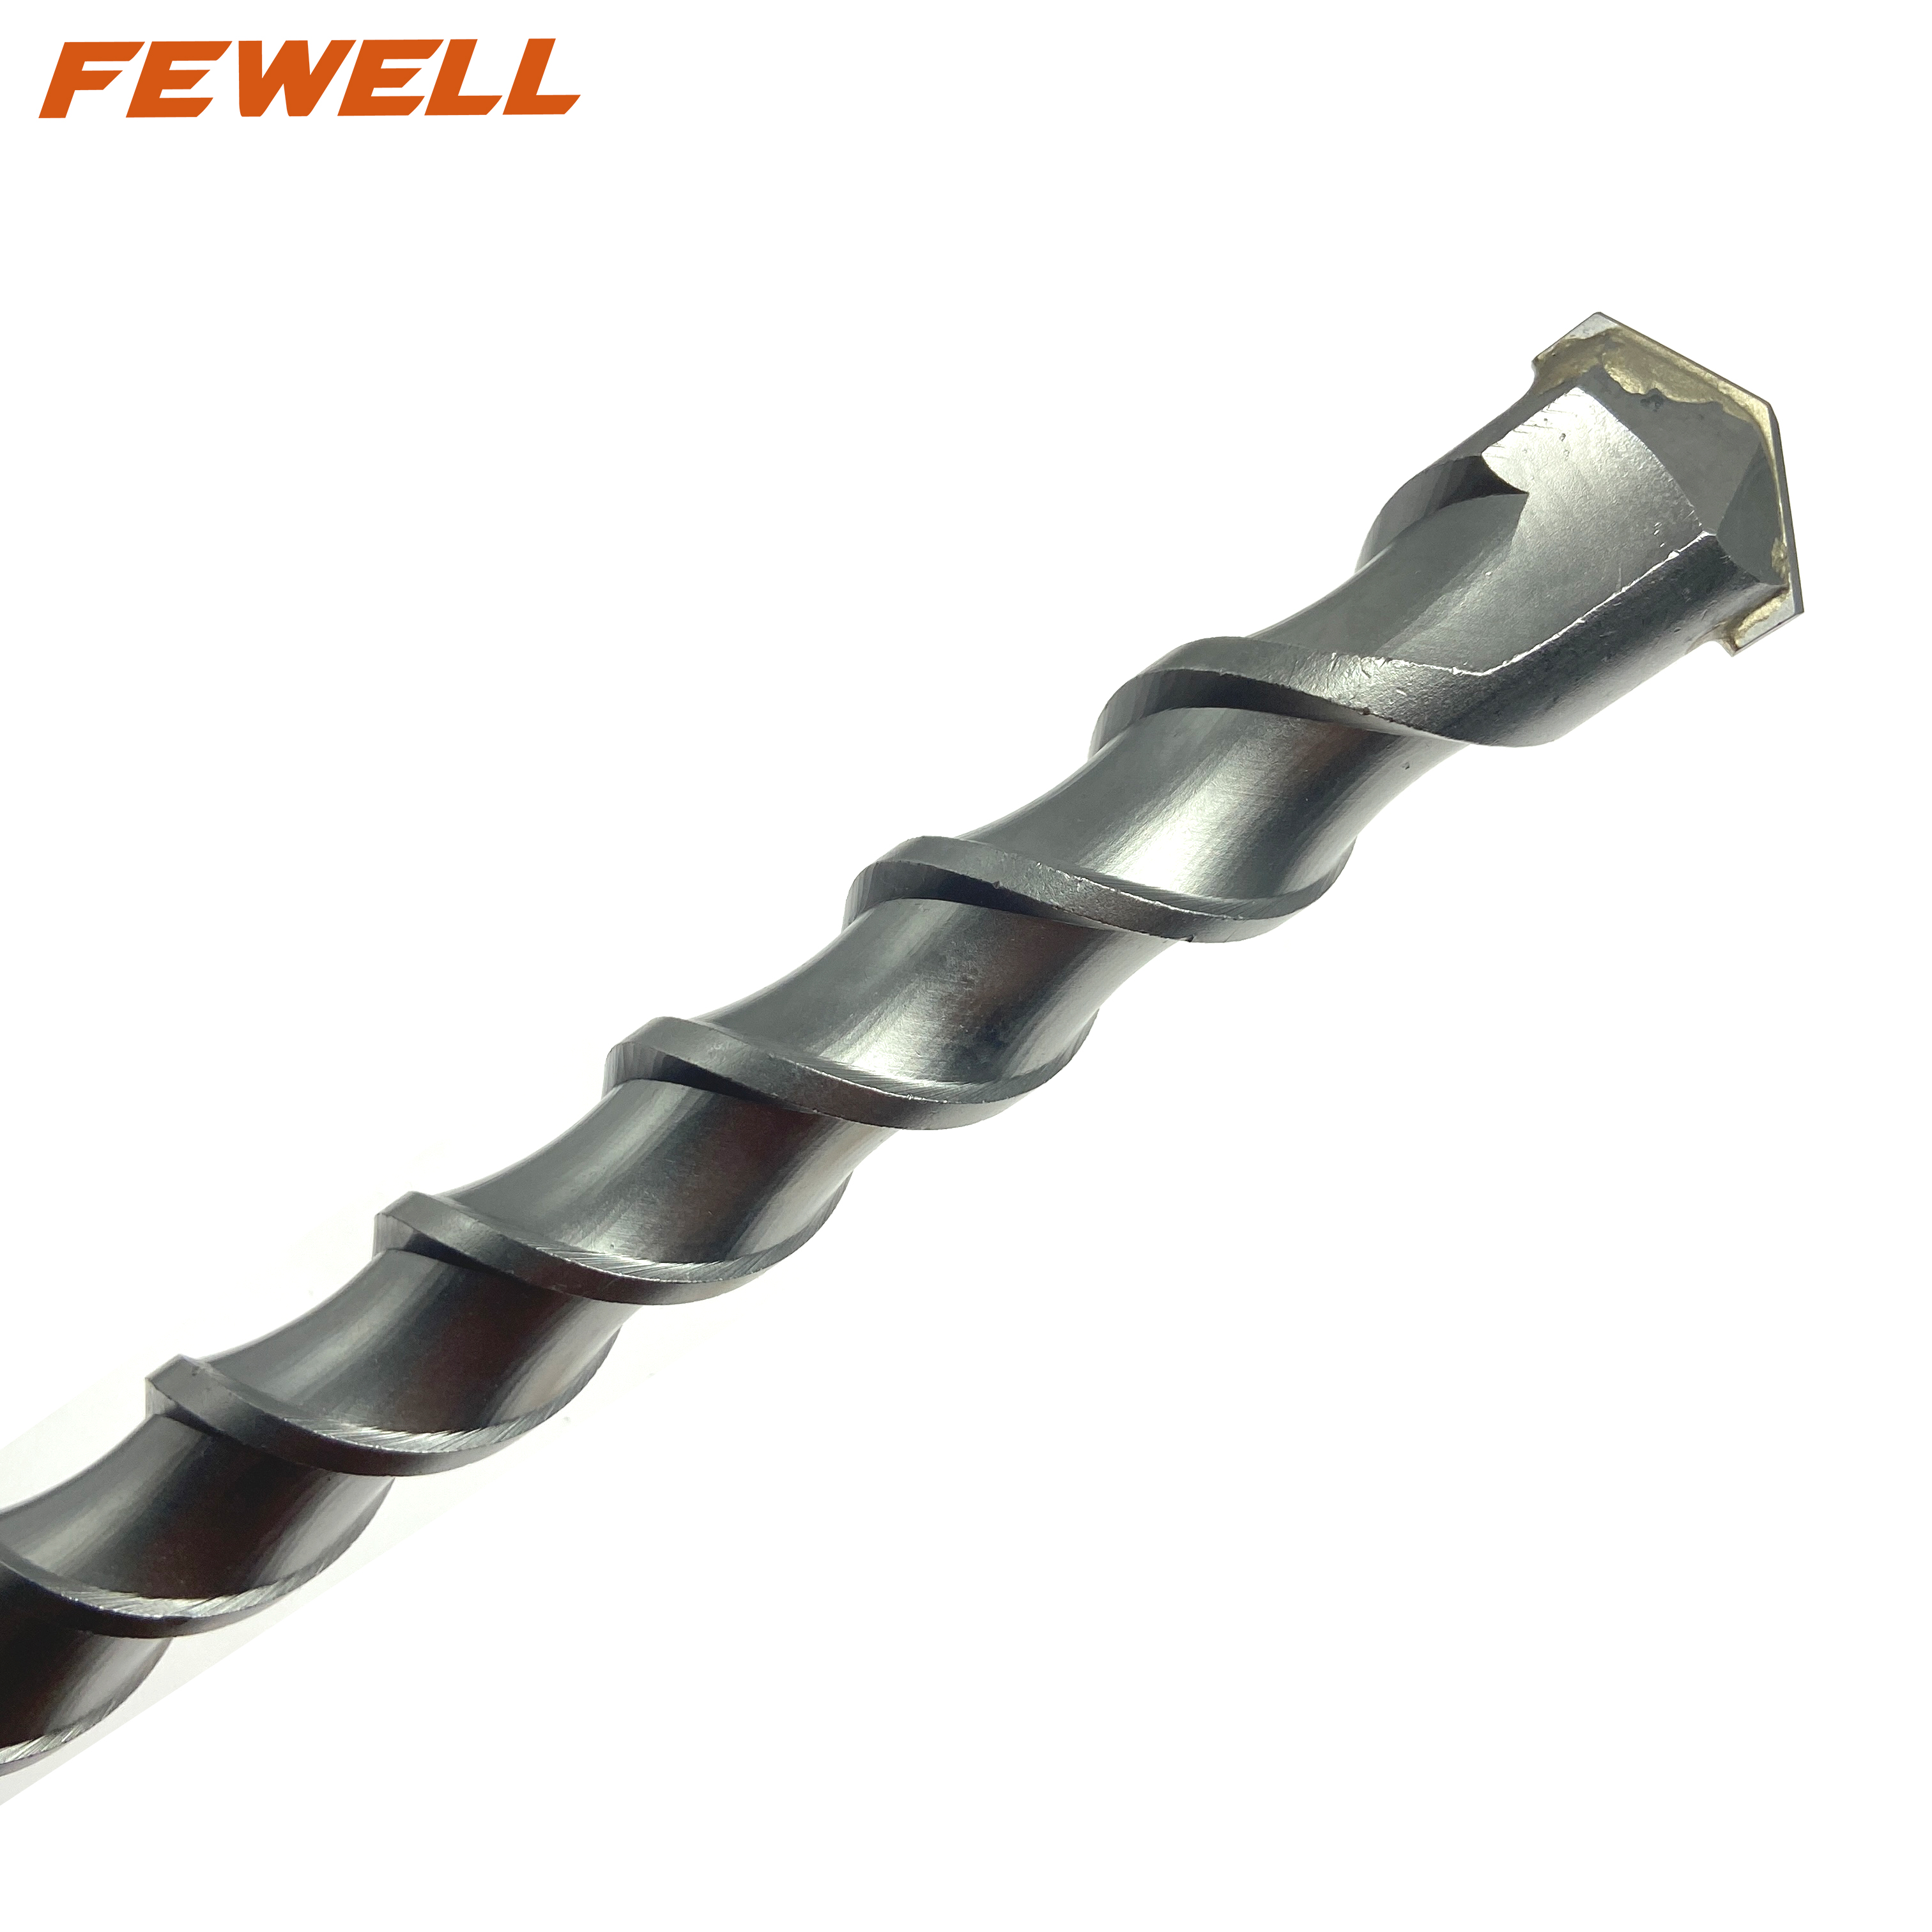 High quality SDS Max Carbide flat Tip 40*600mm Single Flute Electric Hammer Drill Bit for Concrete wall Masonry Stone granite